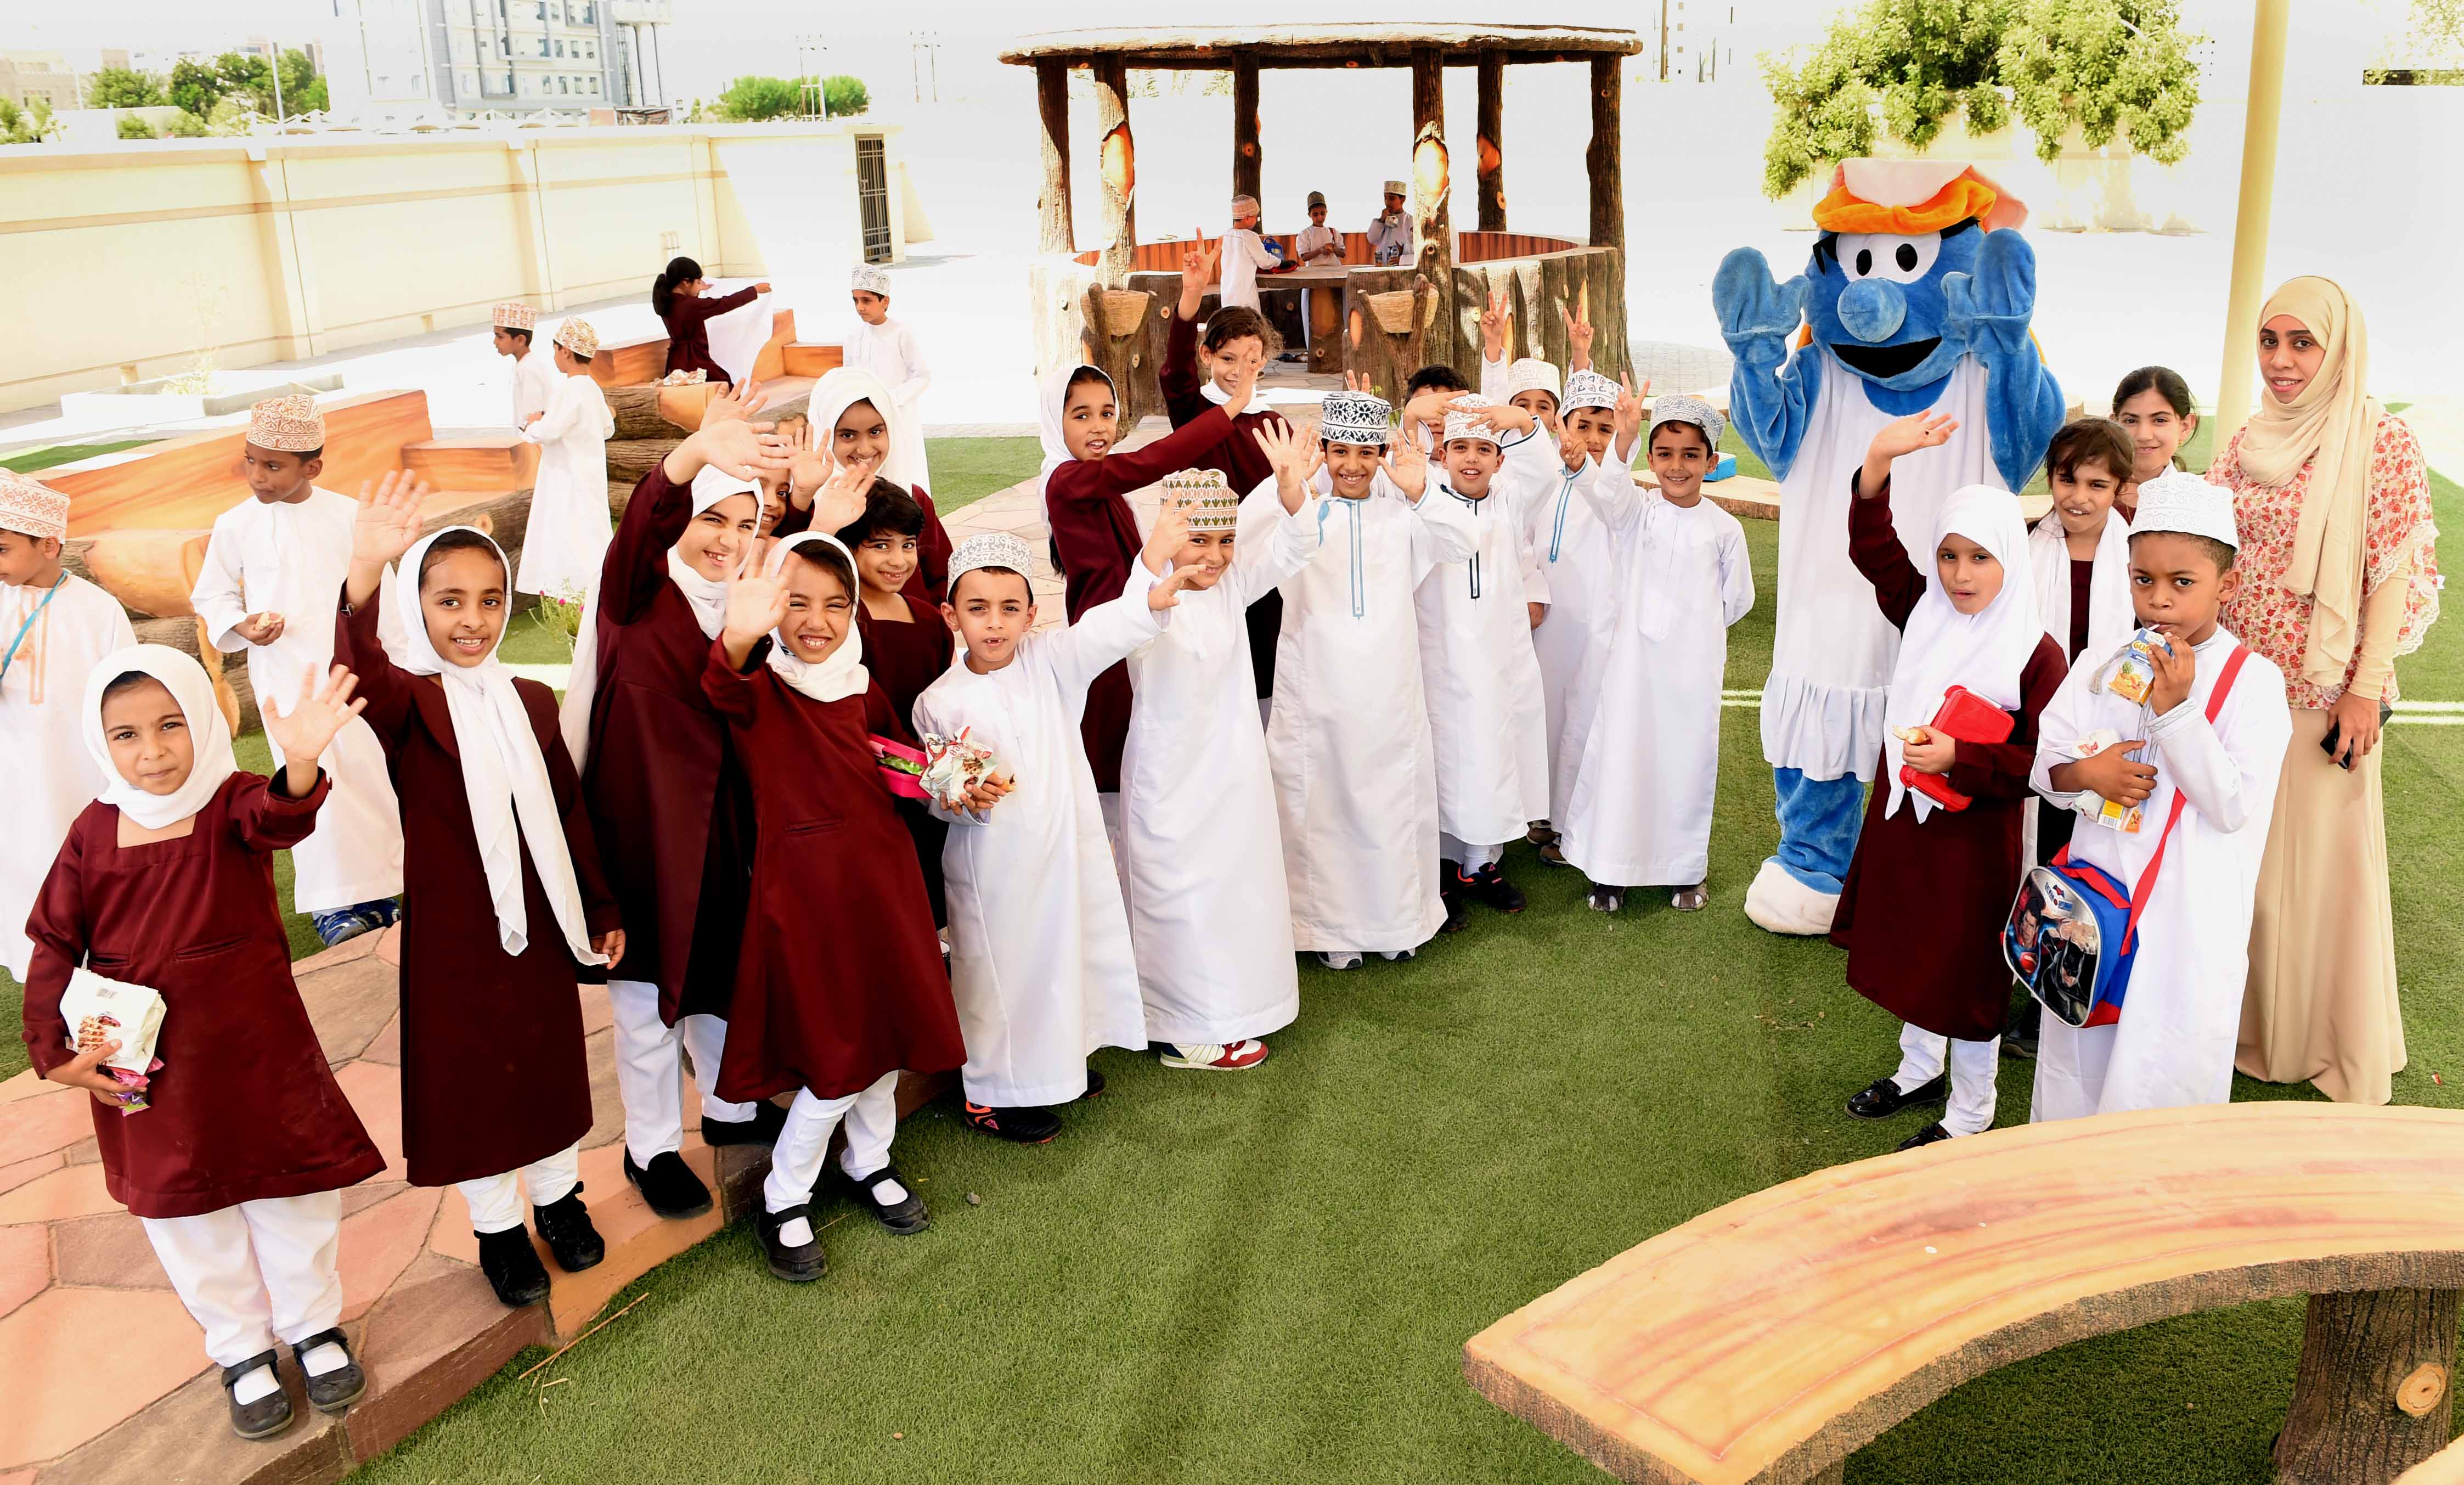 More than 550,000 students enrolled in Oman public schools in new academic year